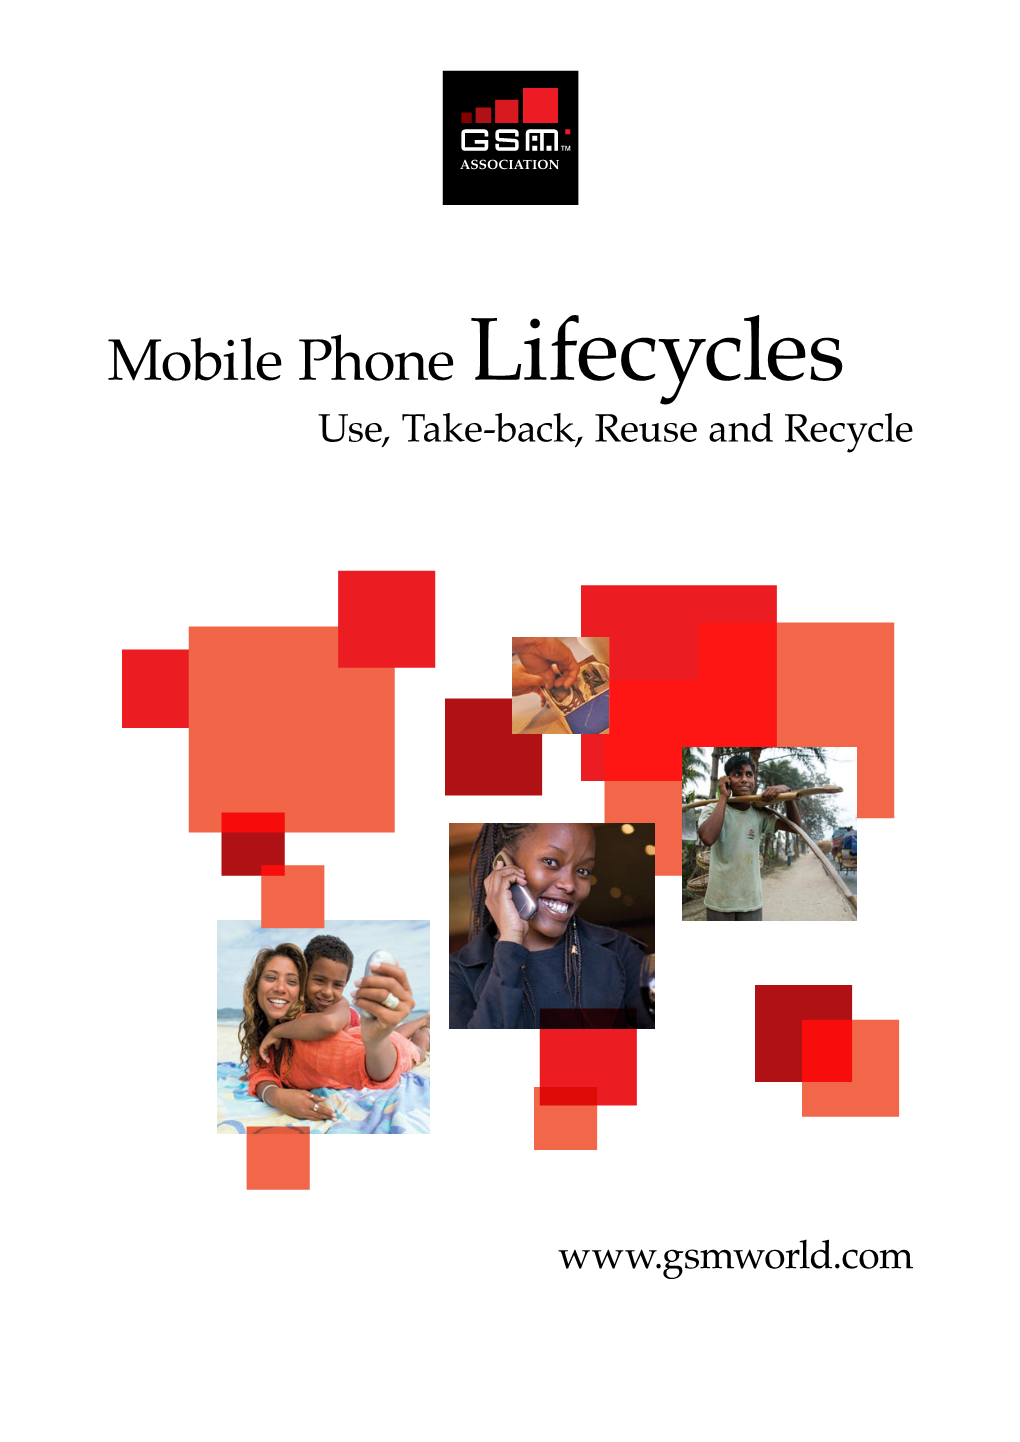 Mobile Phone Lifecycles Use, Take-Back, Reuse and Recycle